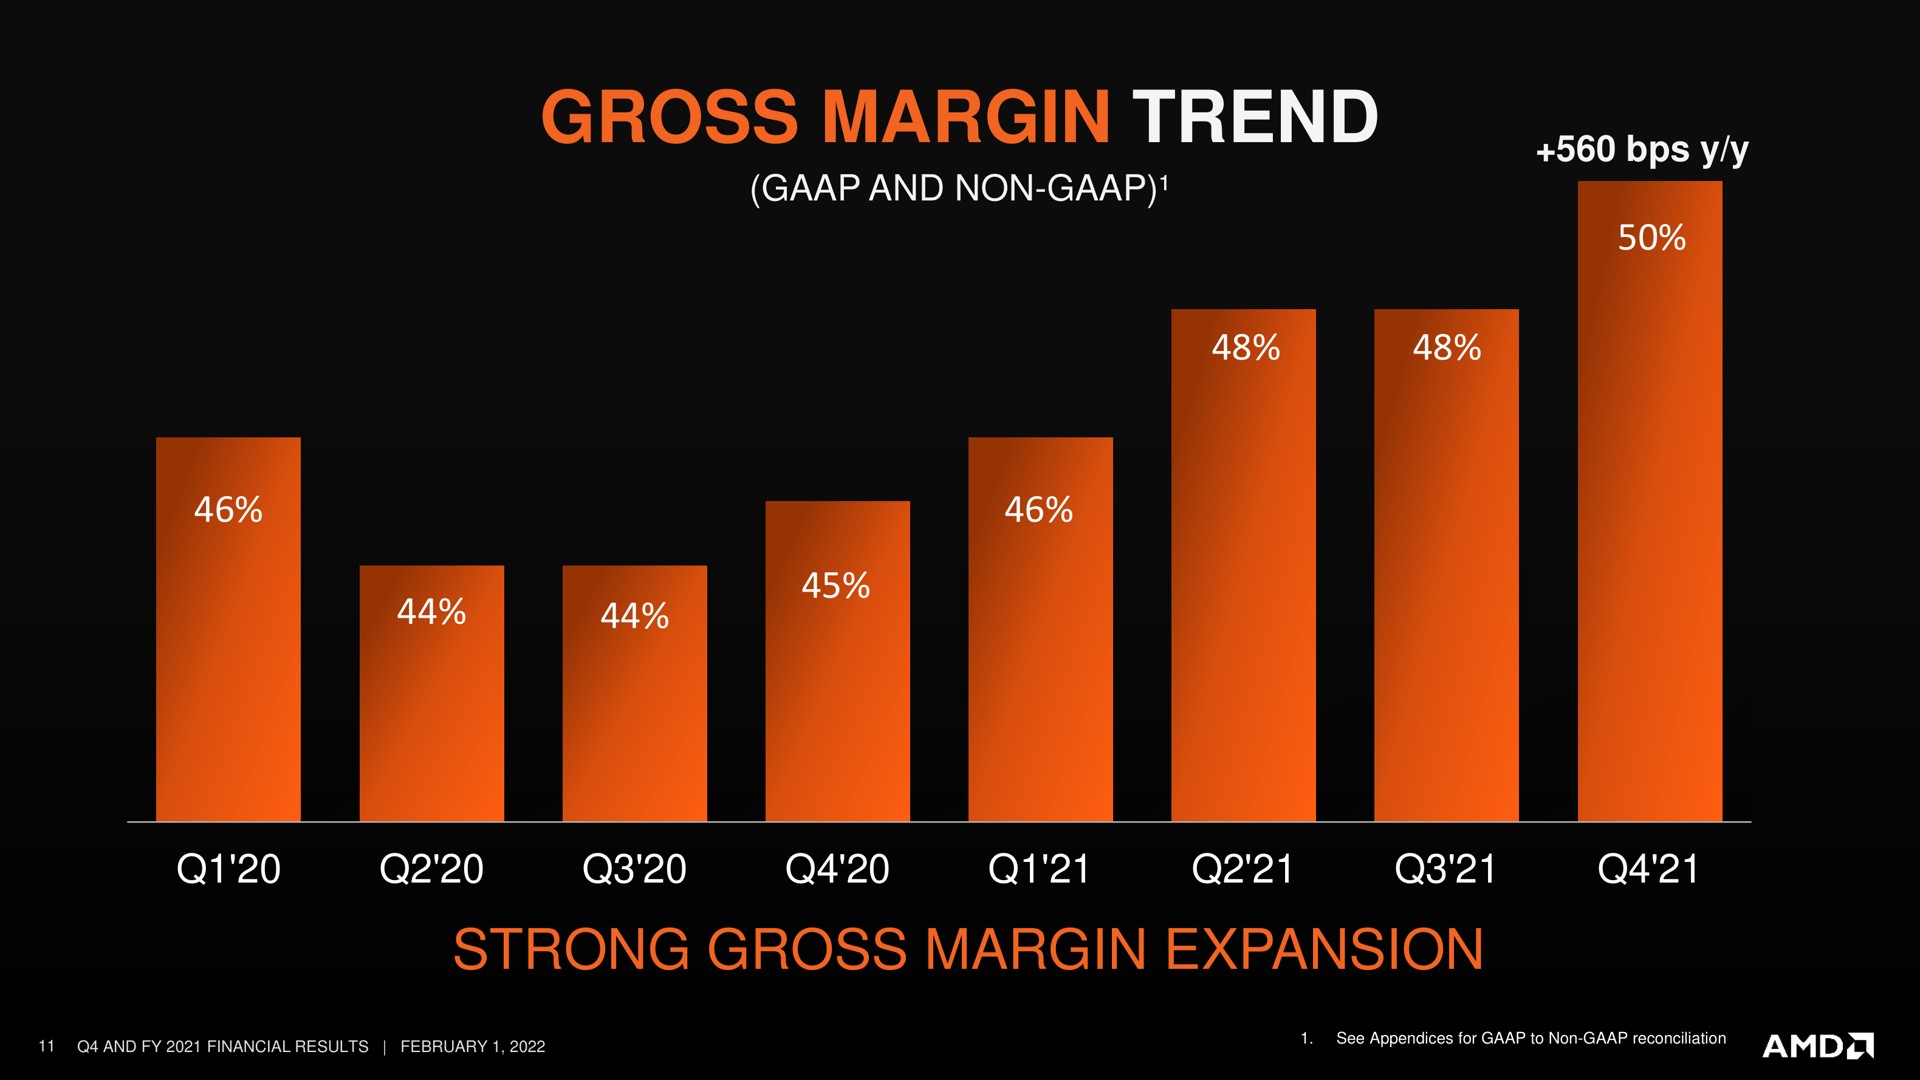 gross margin trend strong expansion | AMD